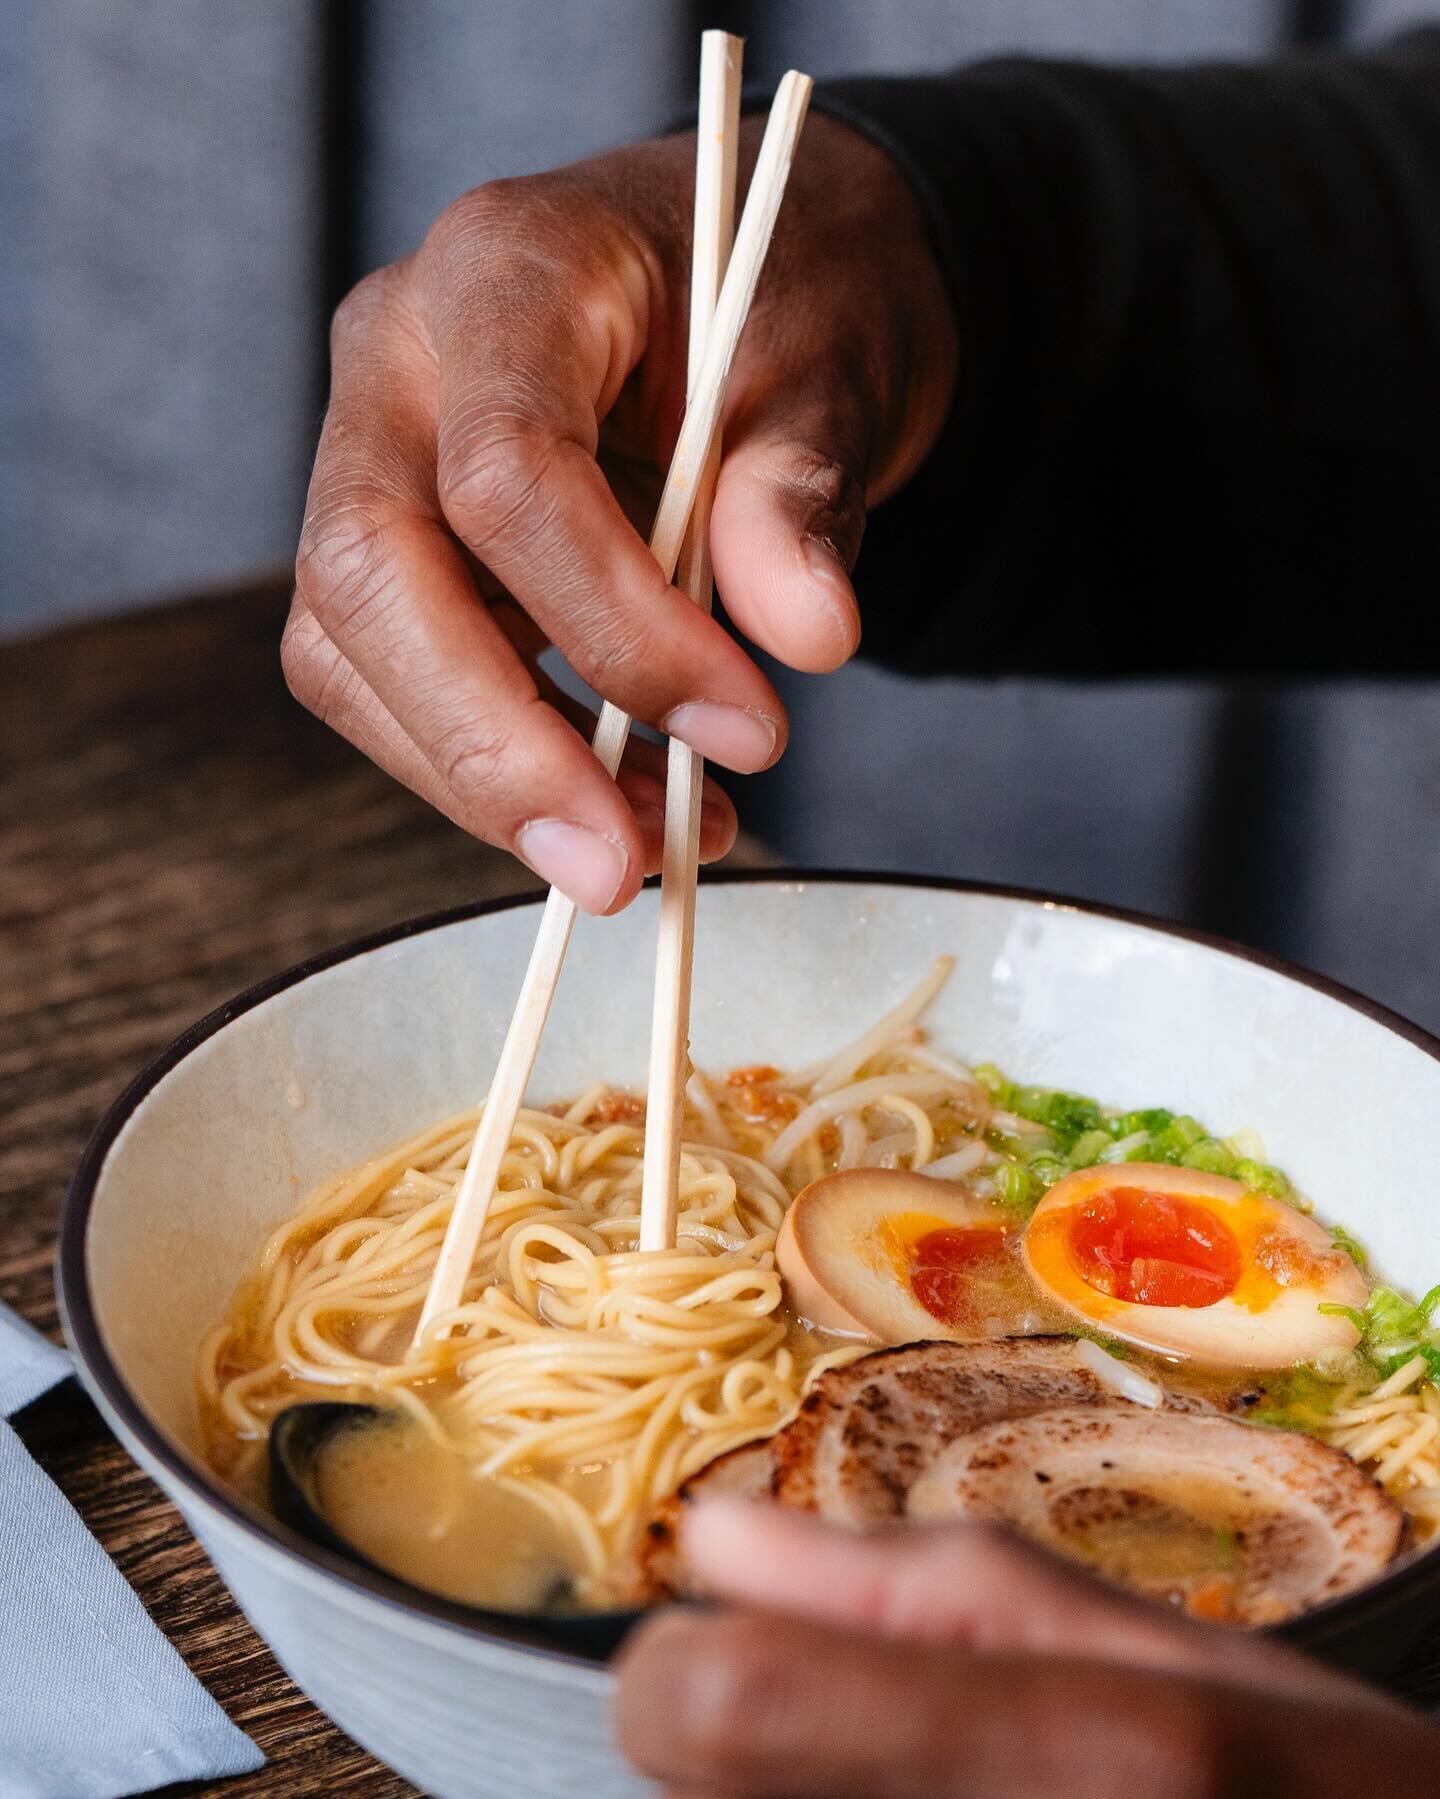 We usually close for Easter, but next Sunday 3/31, we&rsquo;ll be OPEN for special HLAY ramen and cocktails only. 6-8ish! Link in bio to book a bowl and a seat 🍜🪩🍜🪩🍜

Allan is bringing back his shoyu paitan ramen with chashu, a soy egg and other